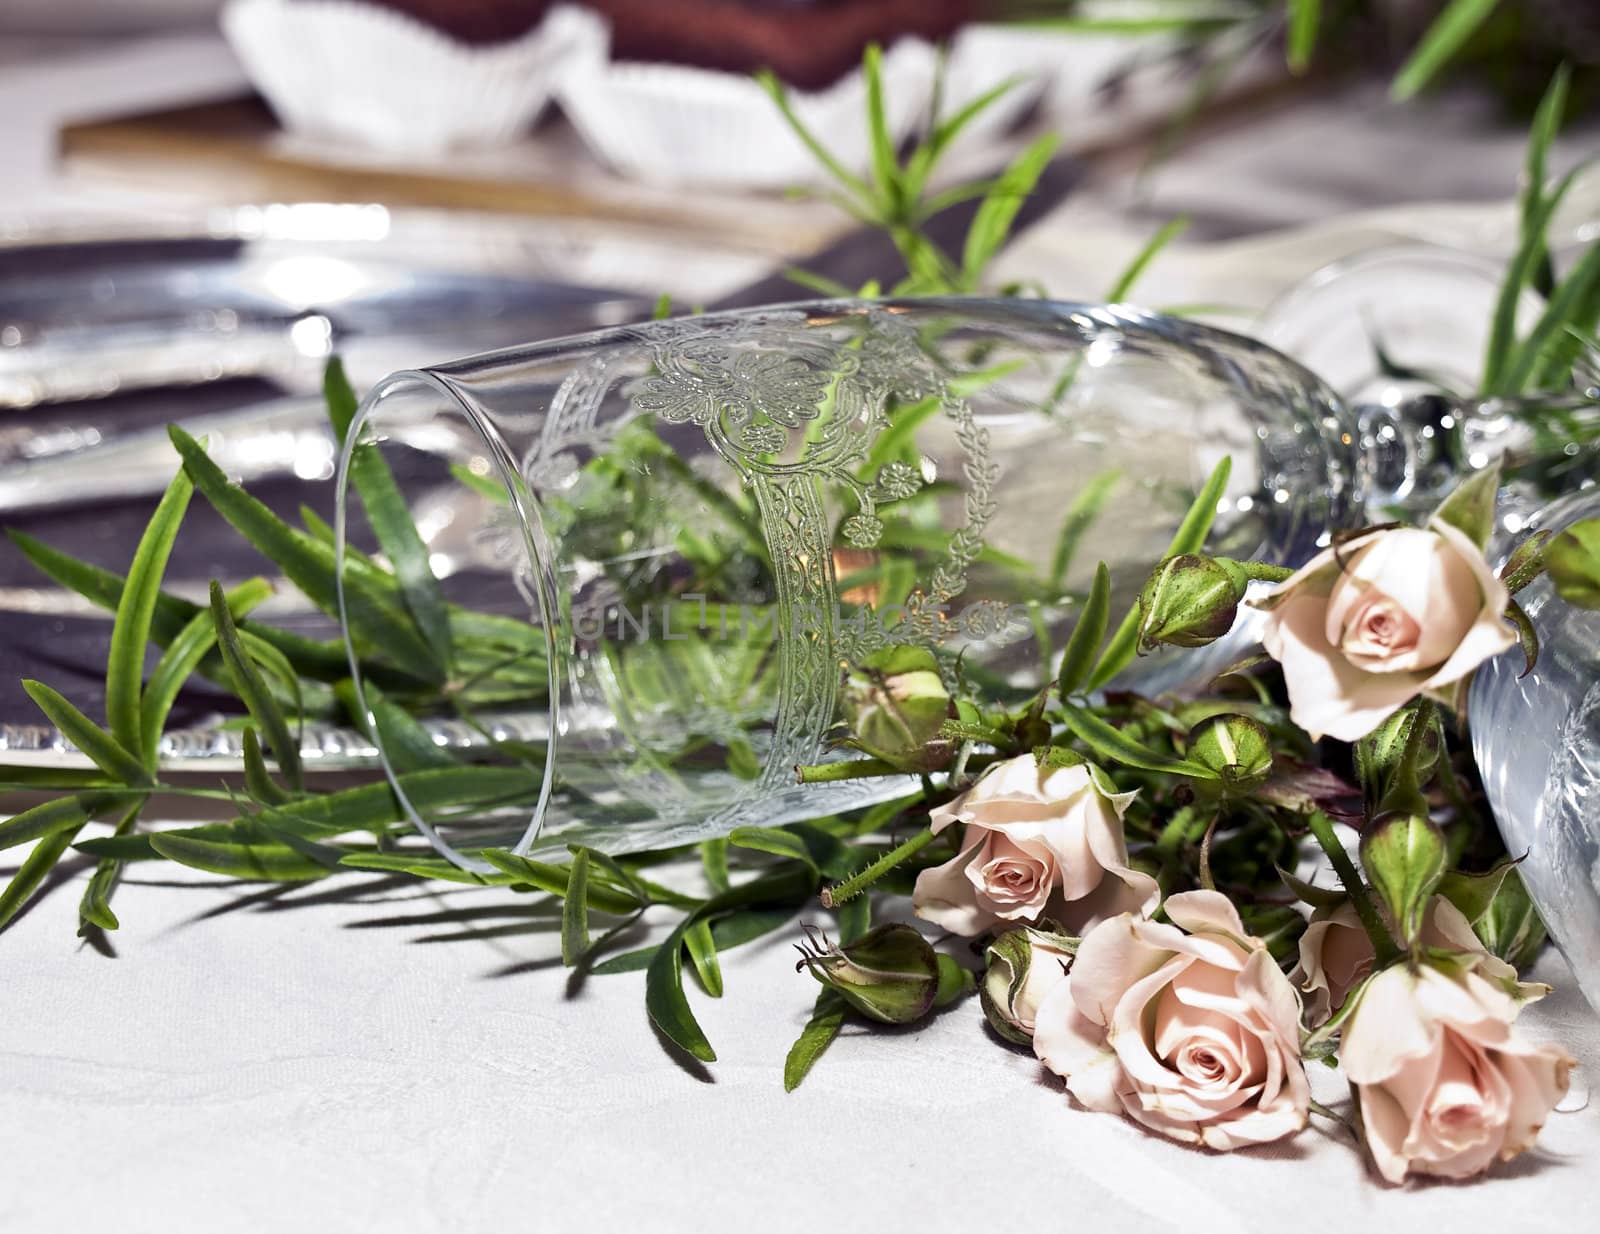 Close up of a wedding champagne glass lying on baby roses